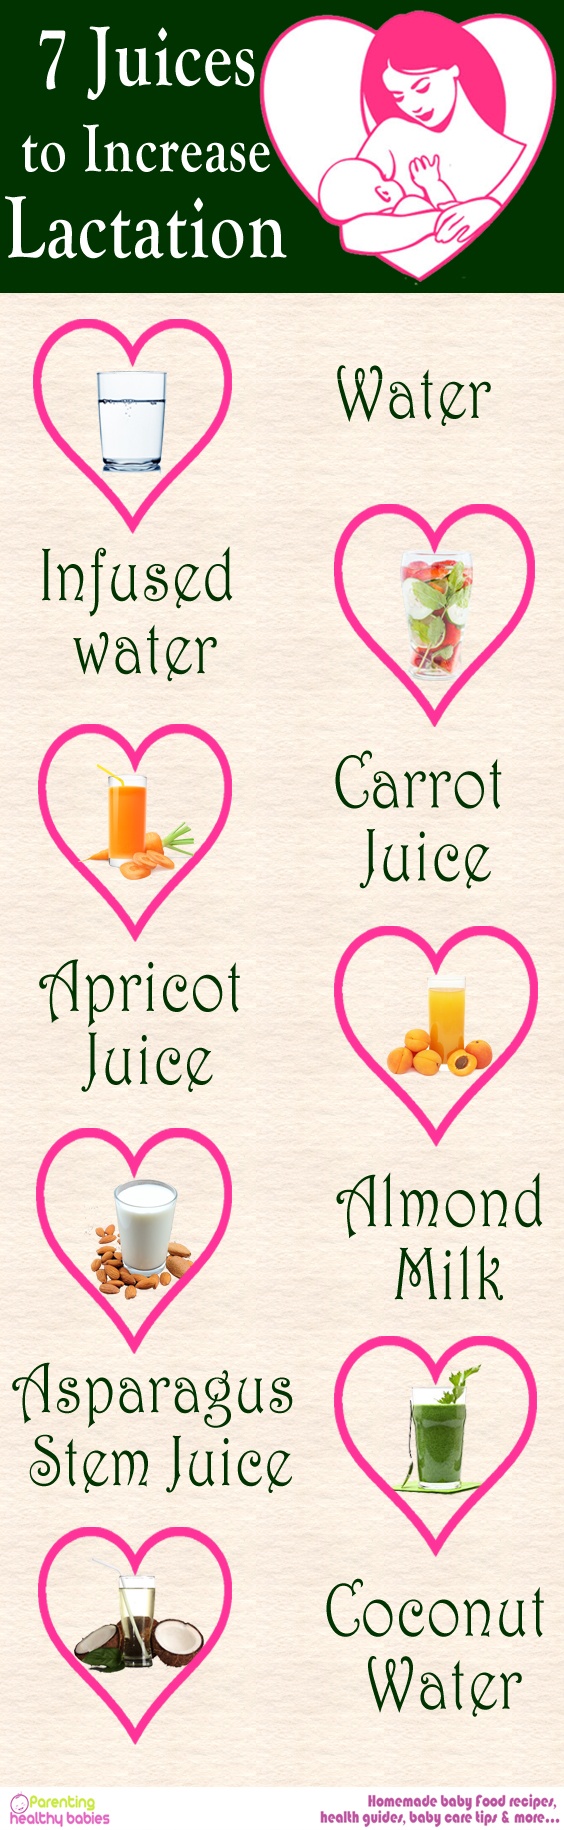 Juices to Increase Lactation